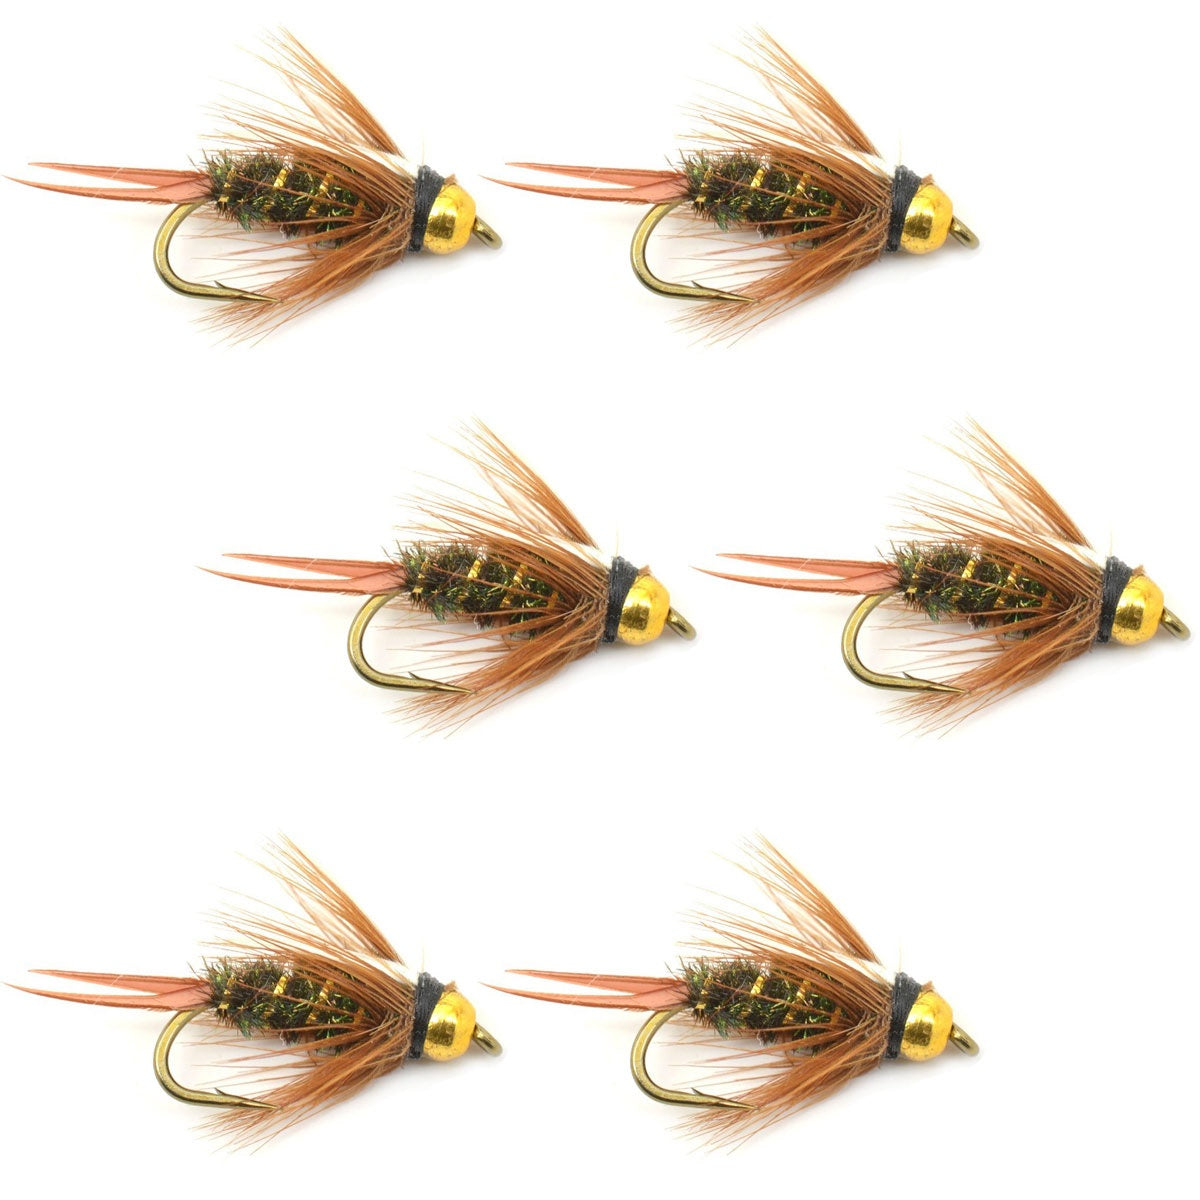 Fishing Fly Nymph Lure Fish Bait